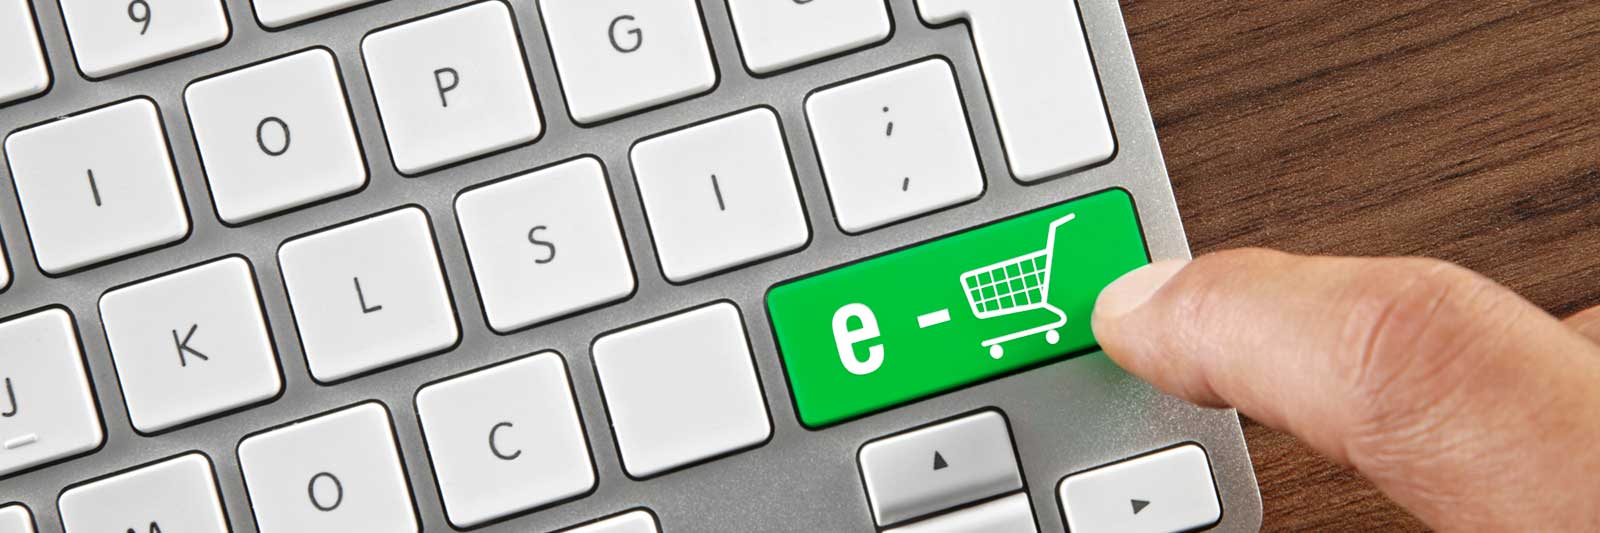 Computer keyboard with white keys and one key in green with a shopping cart image